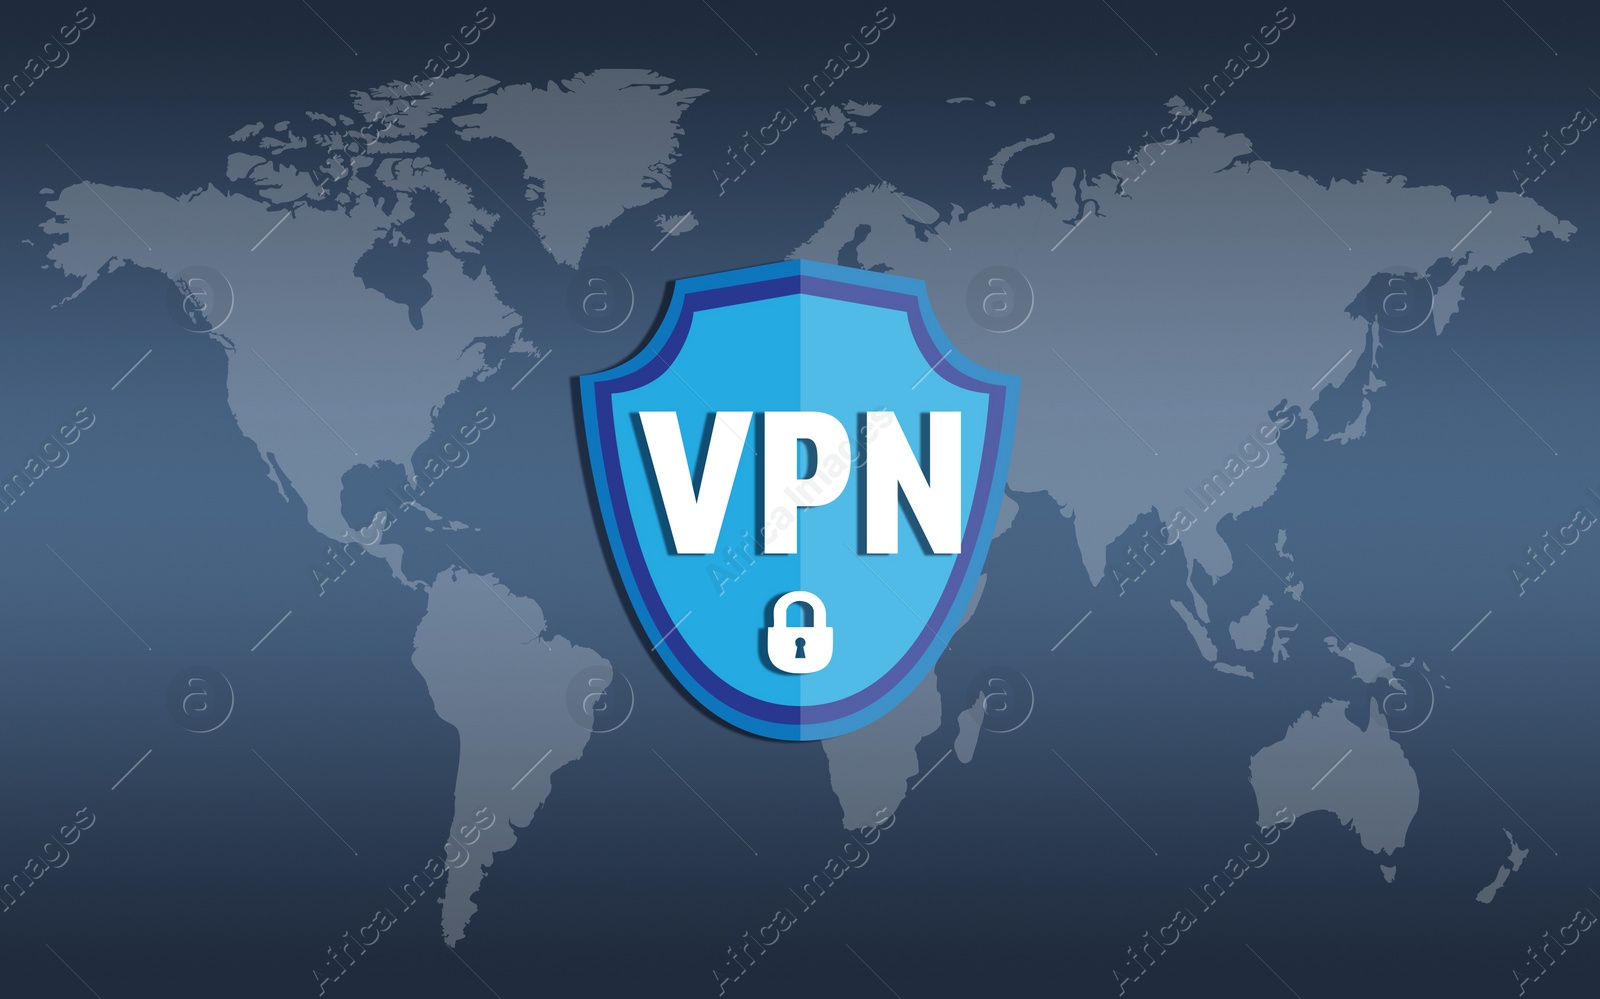 Illustration of Concept of secure network connection. Acronym VPN and world map on grey background, illustration